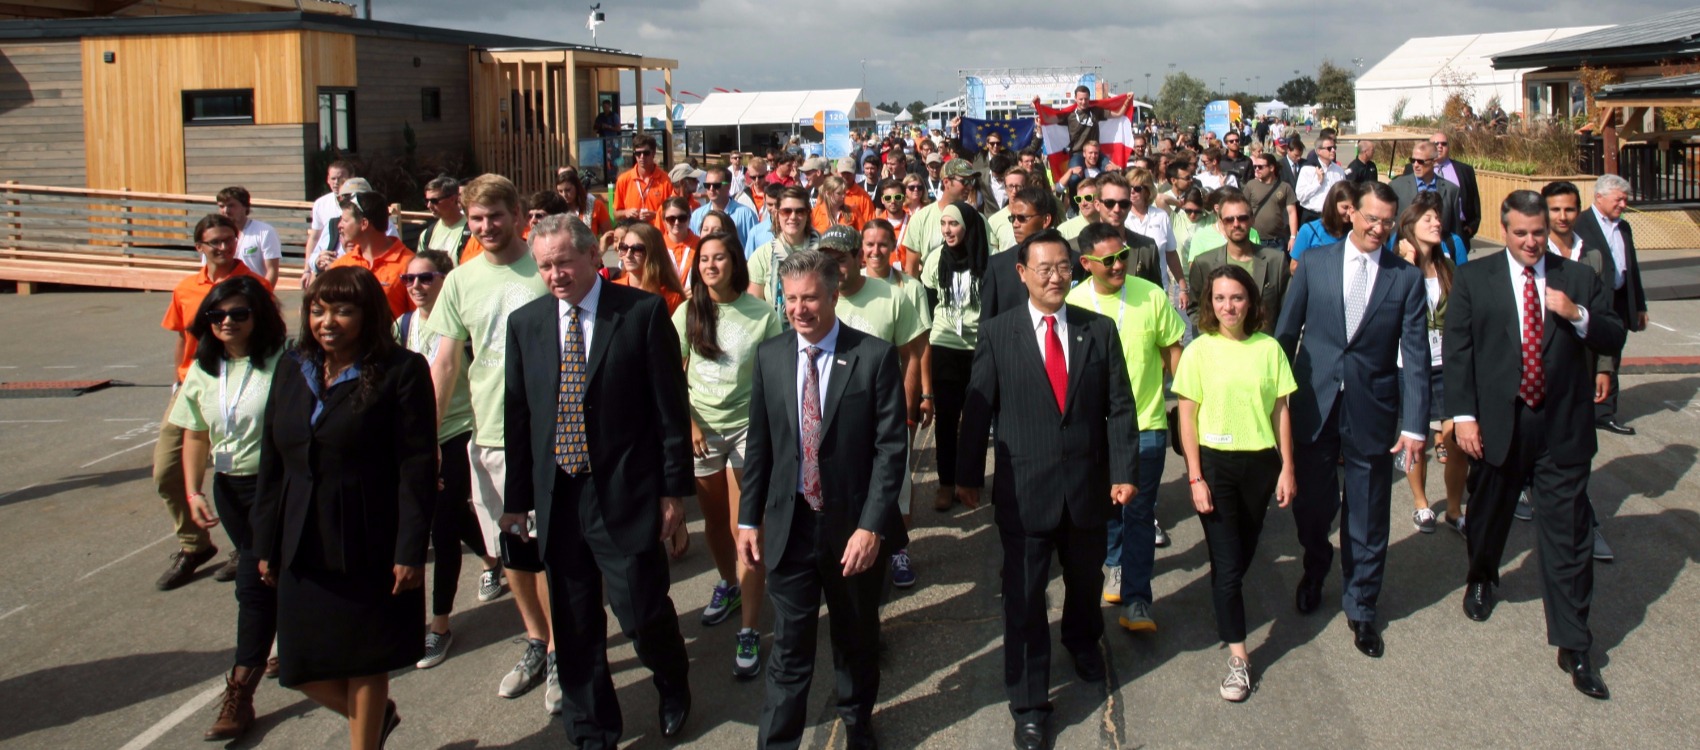 Photo of a group of sponsor representatives-men and women in business attire—leading a larger group of young men and women—all student team members of the Solar Decathlon 2013 teams—as they enter the Solar Decathlon competition village in Irvine, California. Team houses, white event tents, and signs are visible in the background.